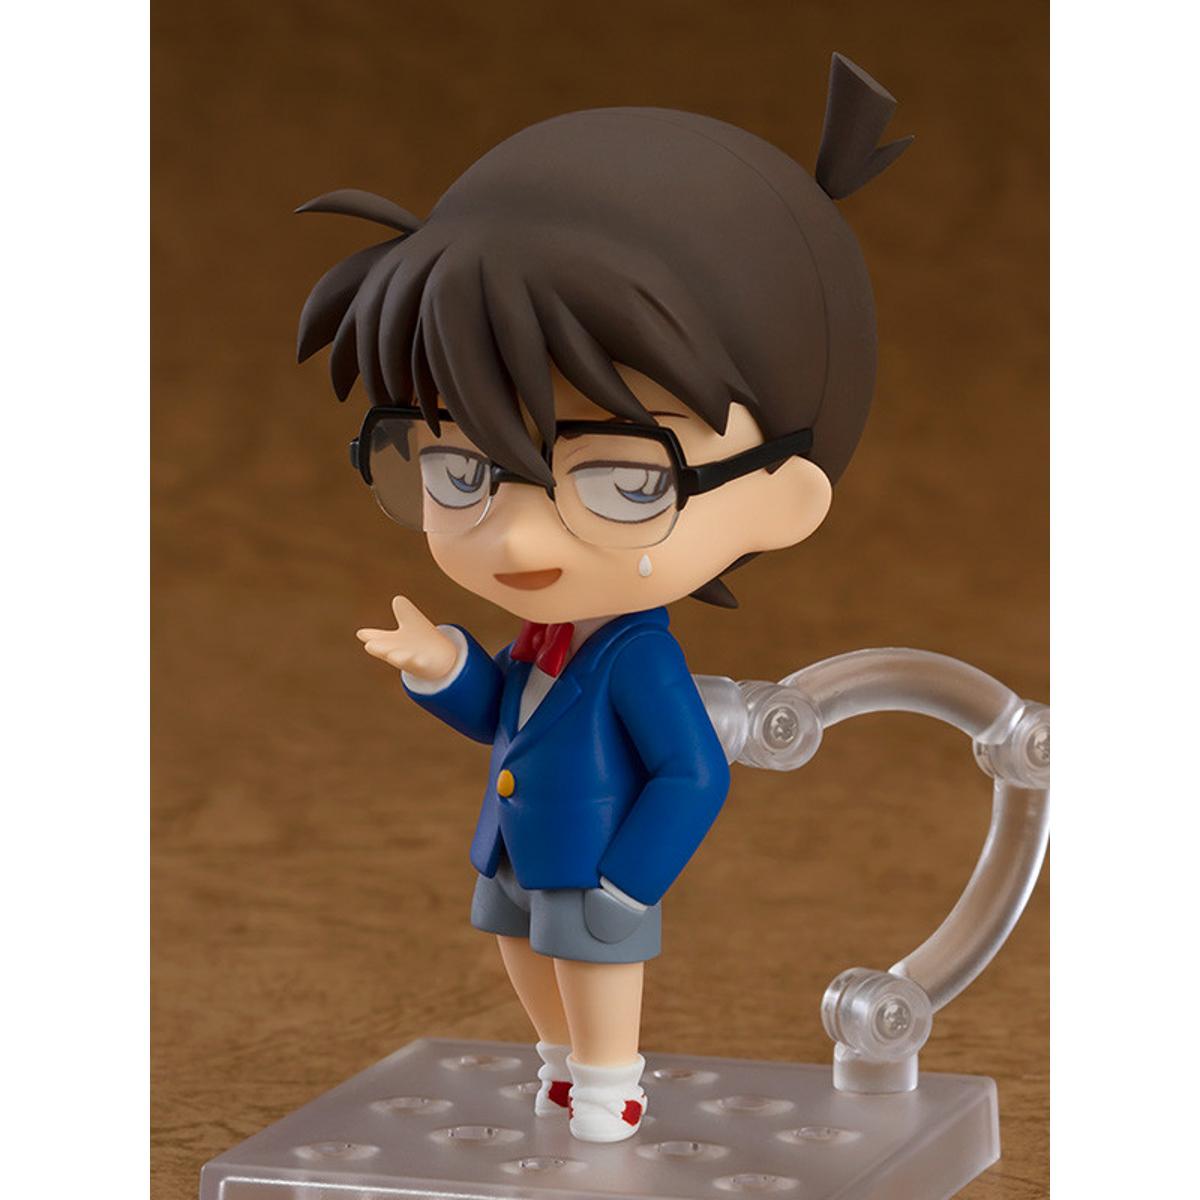 Details about   Nendoroid Detective Conan Edogawa Action Figure Resale w/ Tracking NEW 